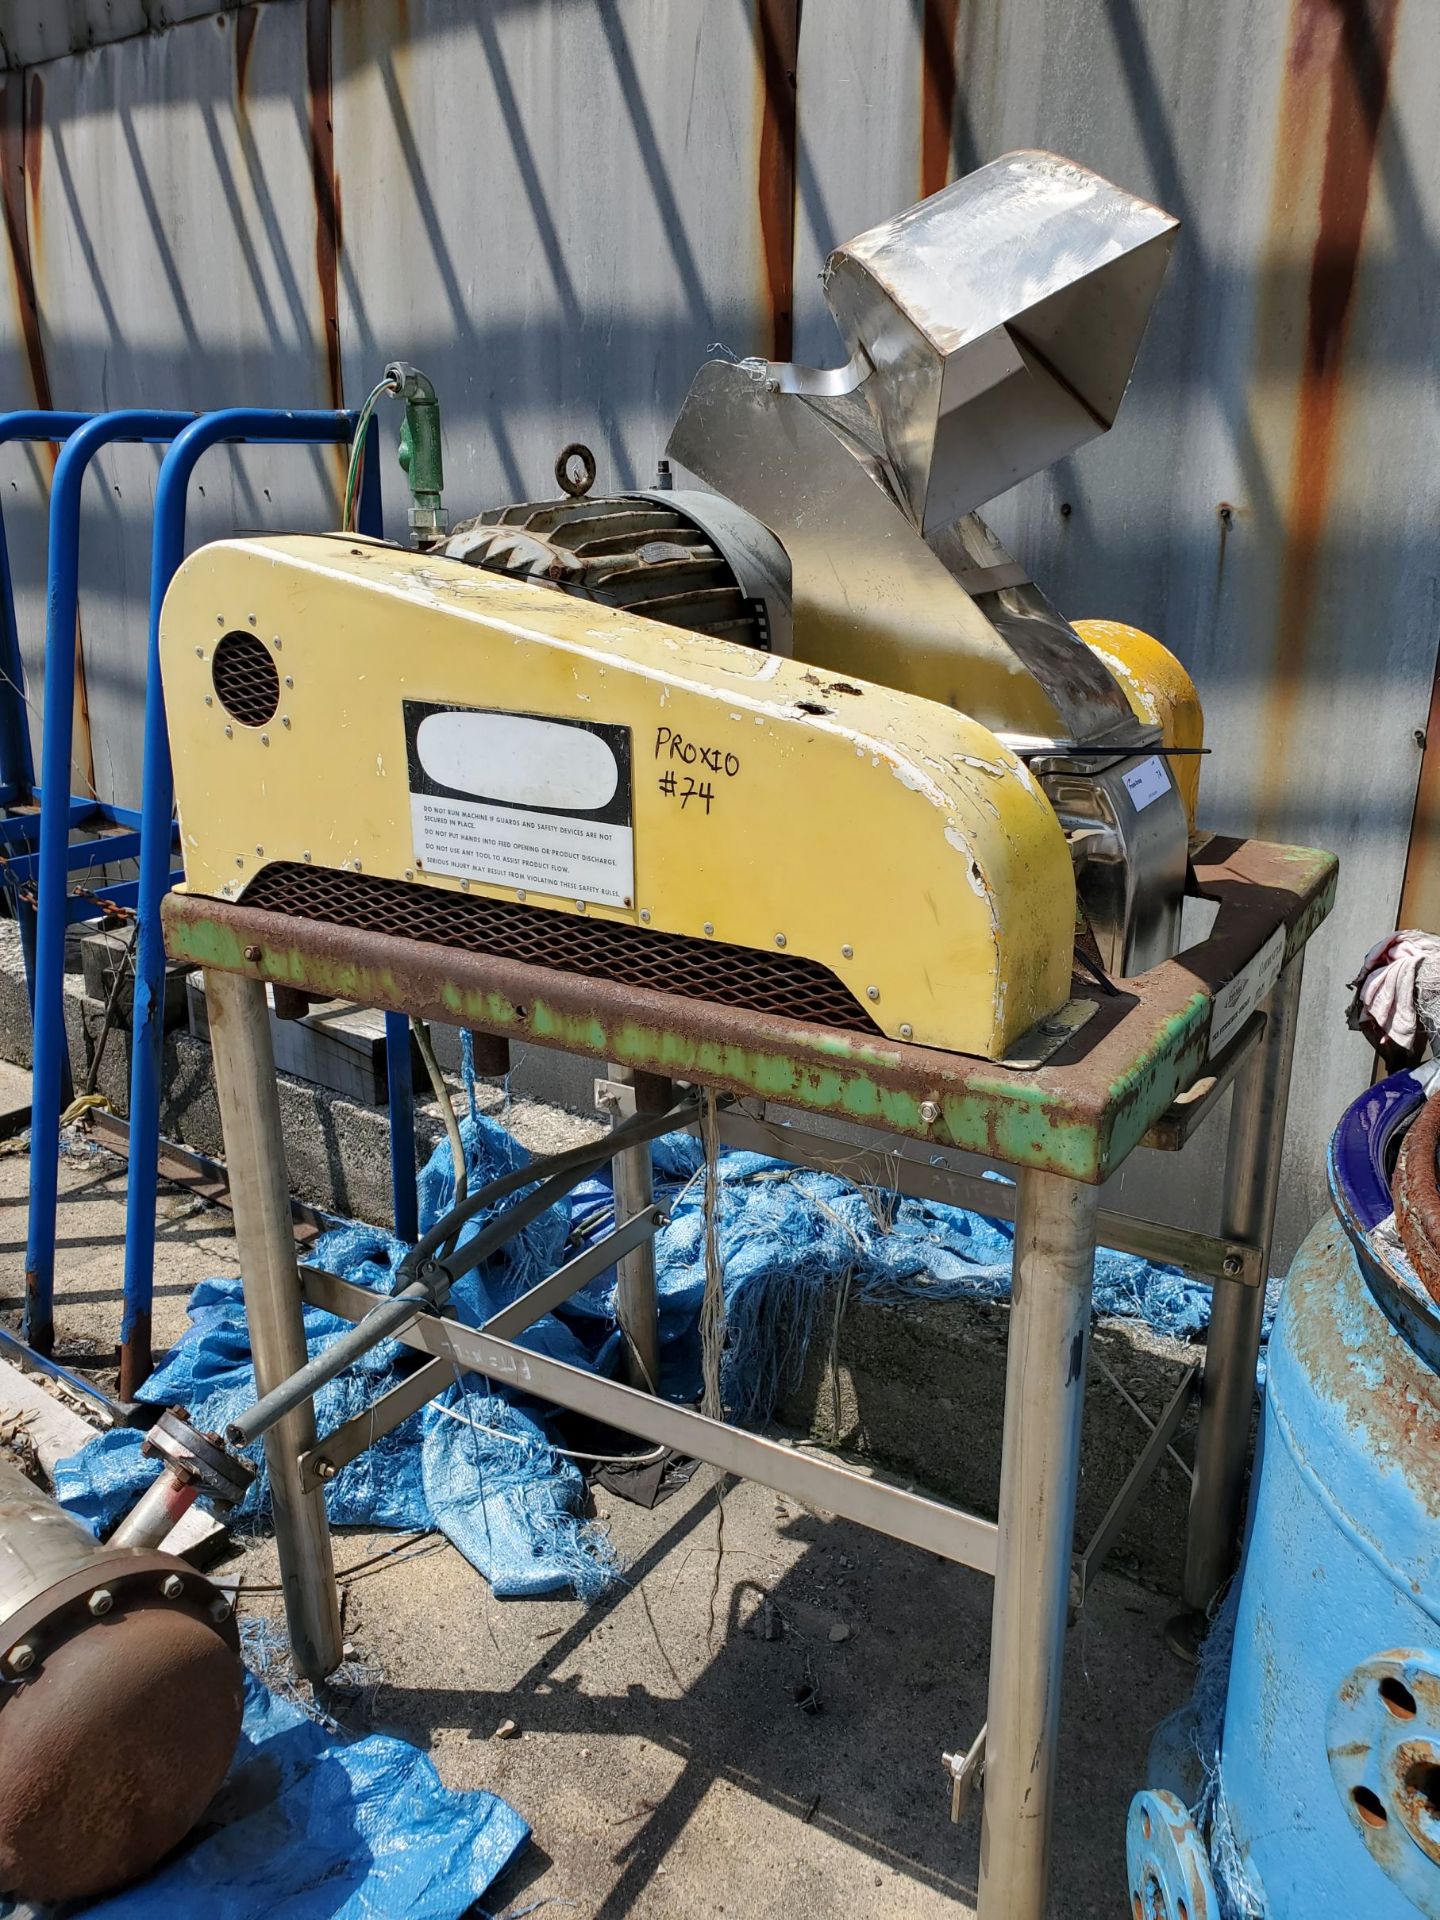 Fitzpatrick Fitzmill, model DAS06, 10HP Explosion Proof electric motor, fixed knives, gravity fed,